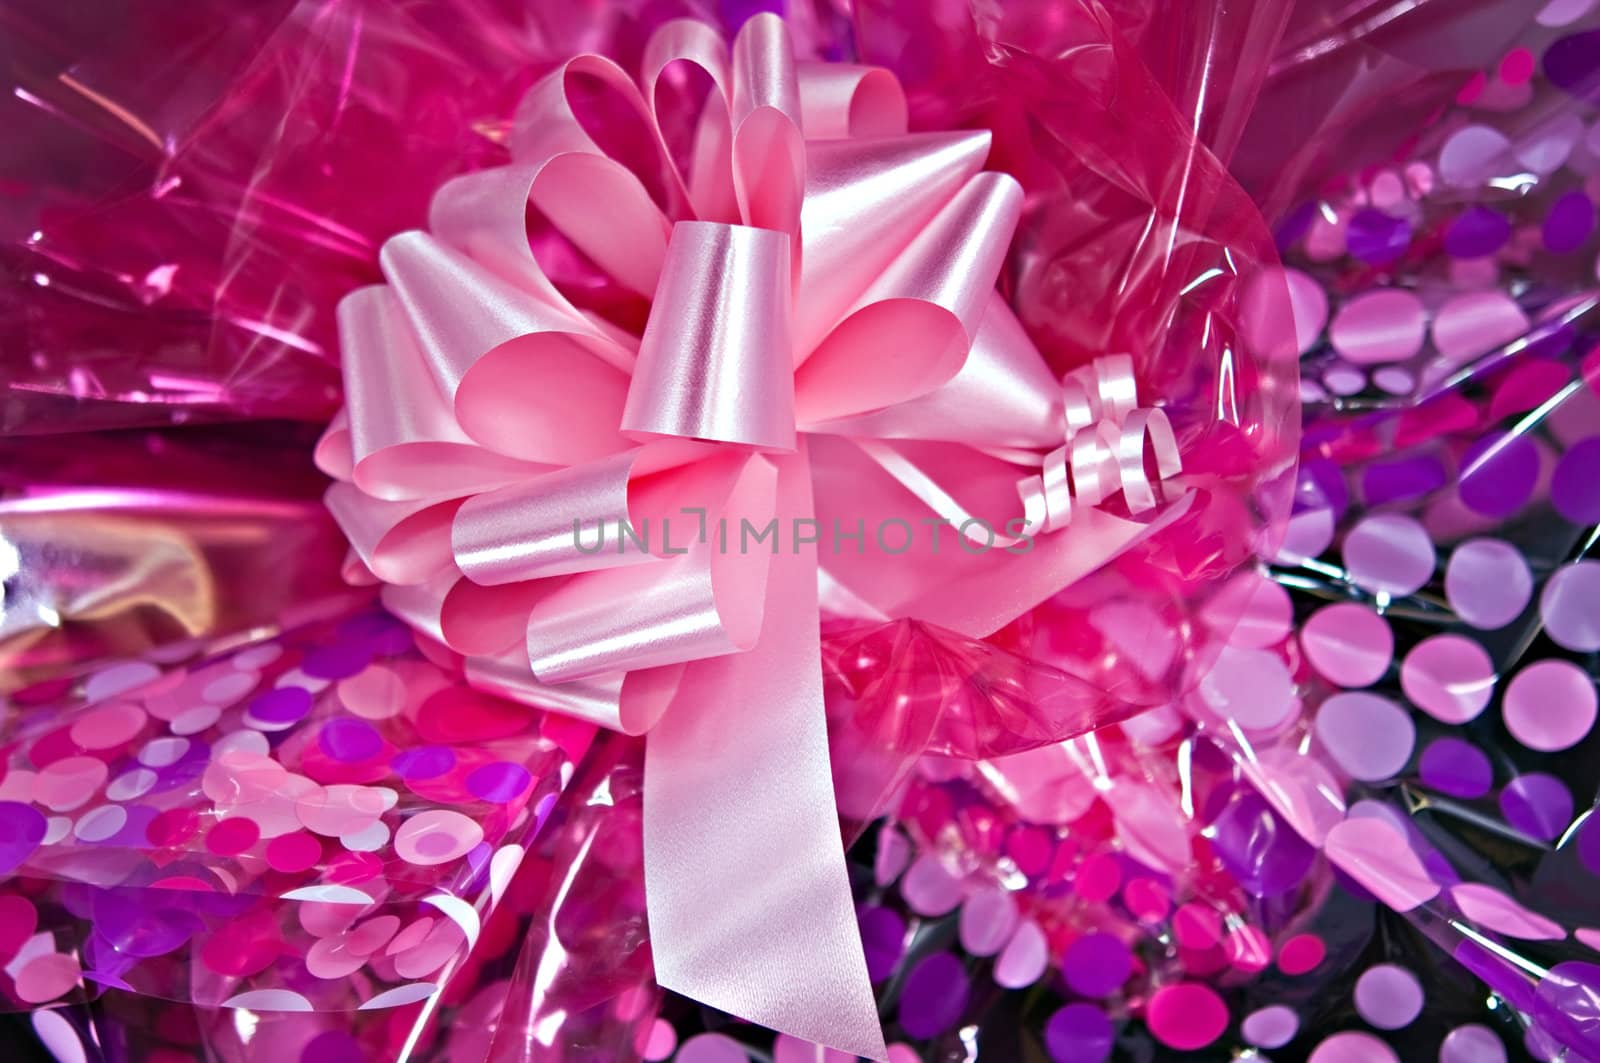 A pink bow on colorful wrapping paper.